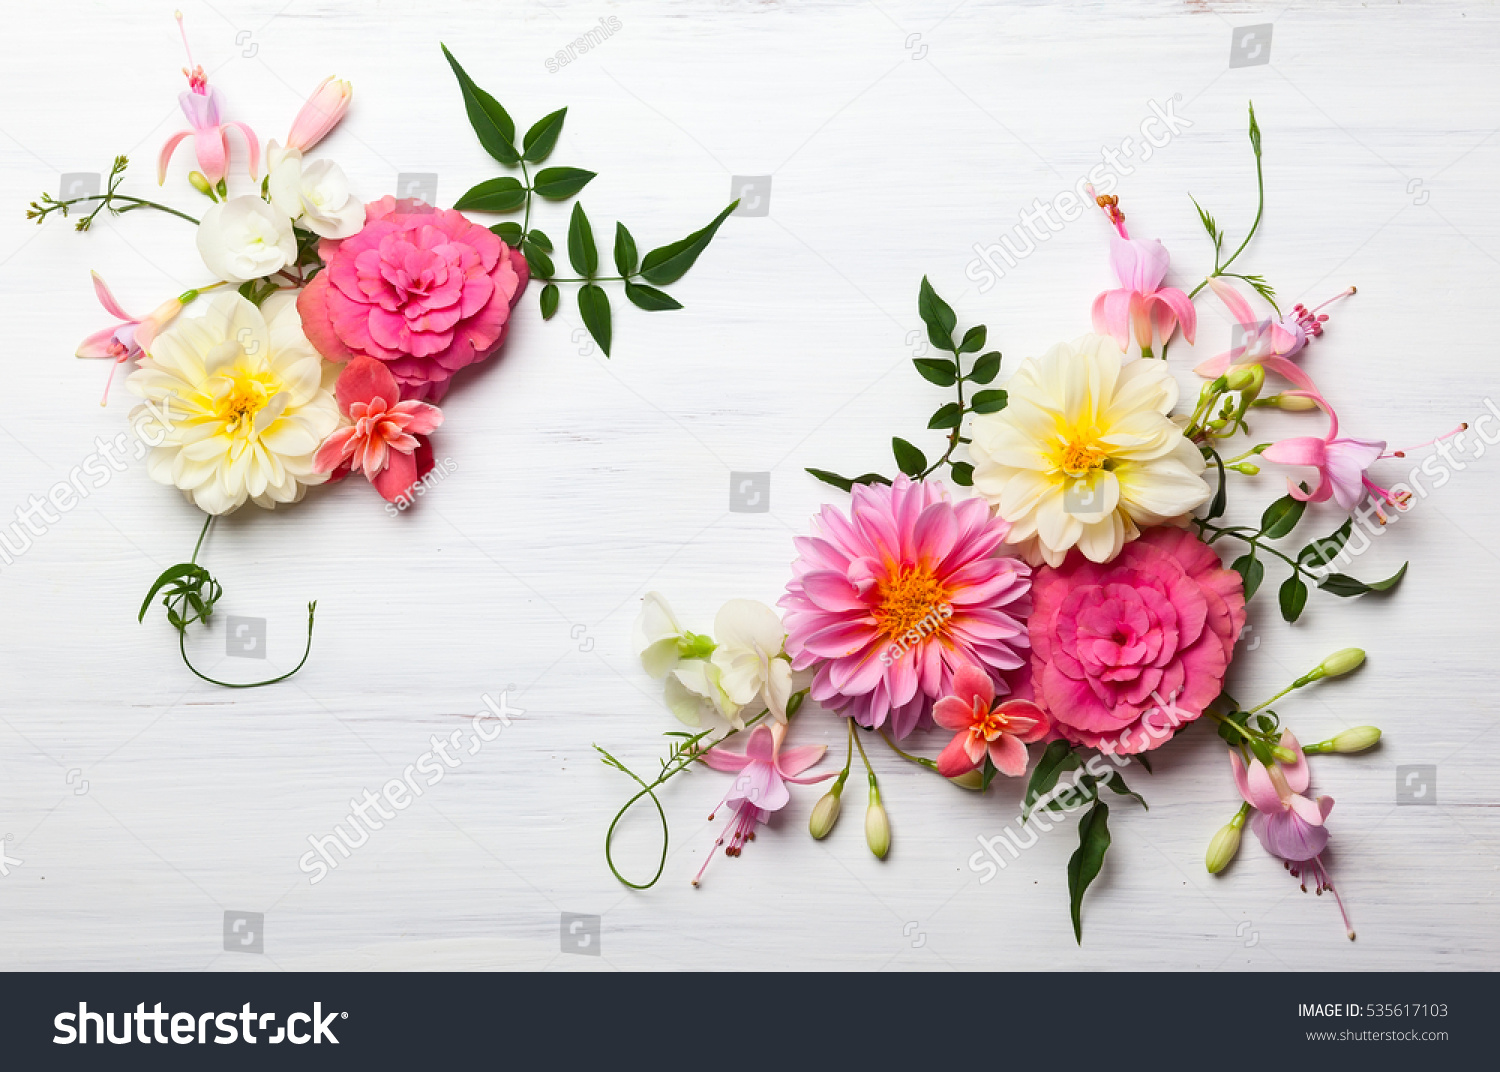 Festive flower composition on the white wooden background. Overhead view. #535617103